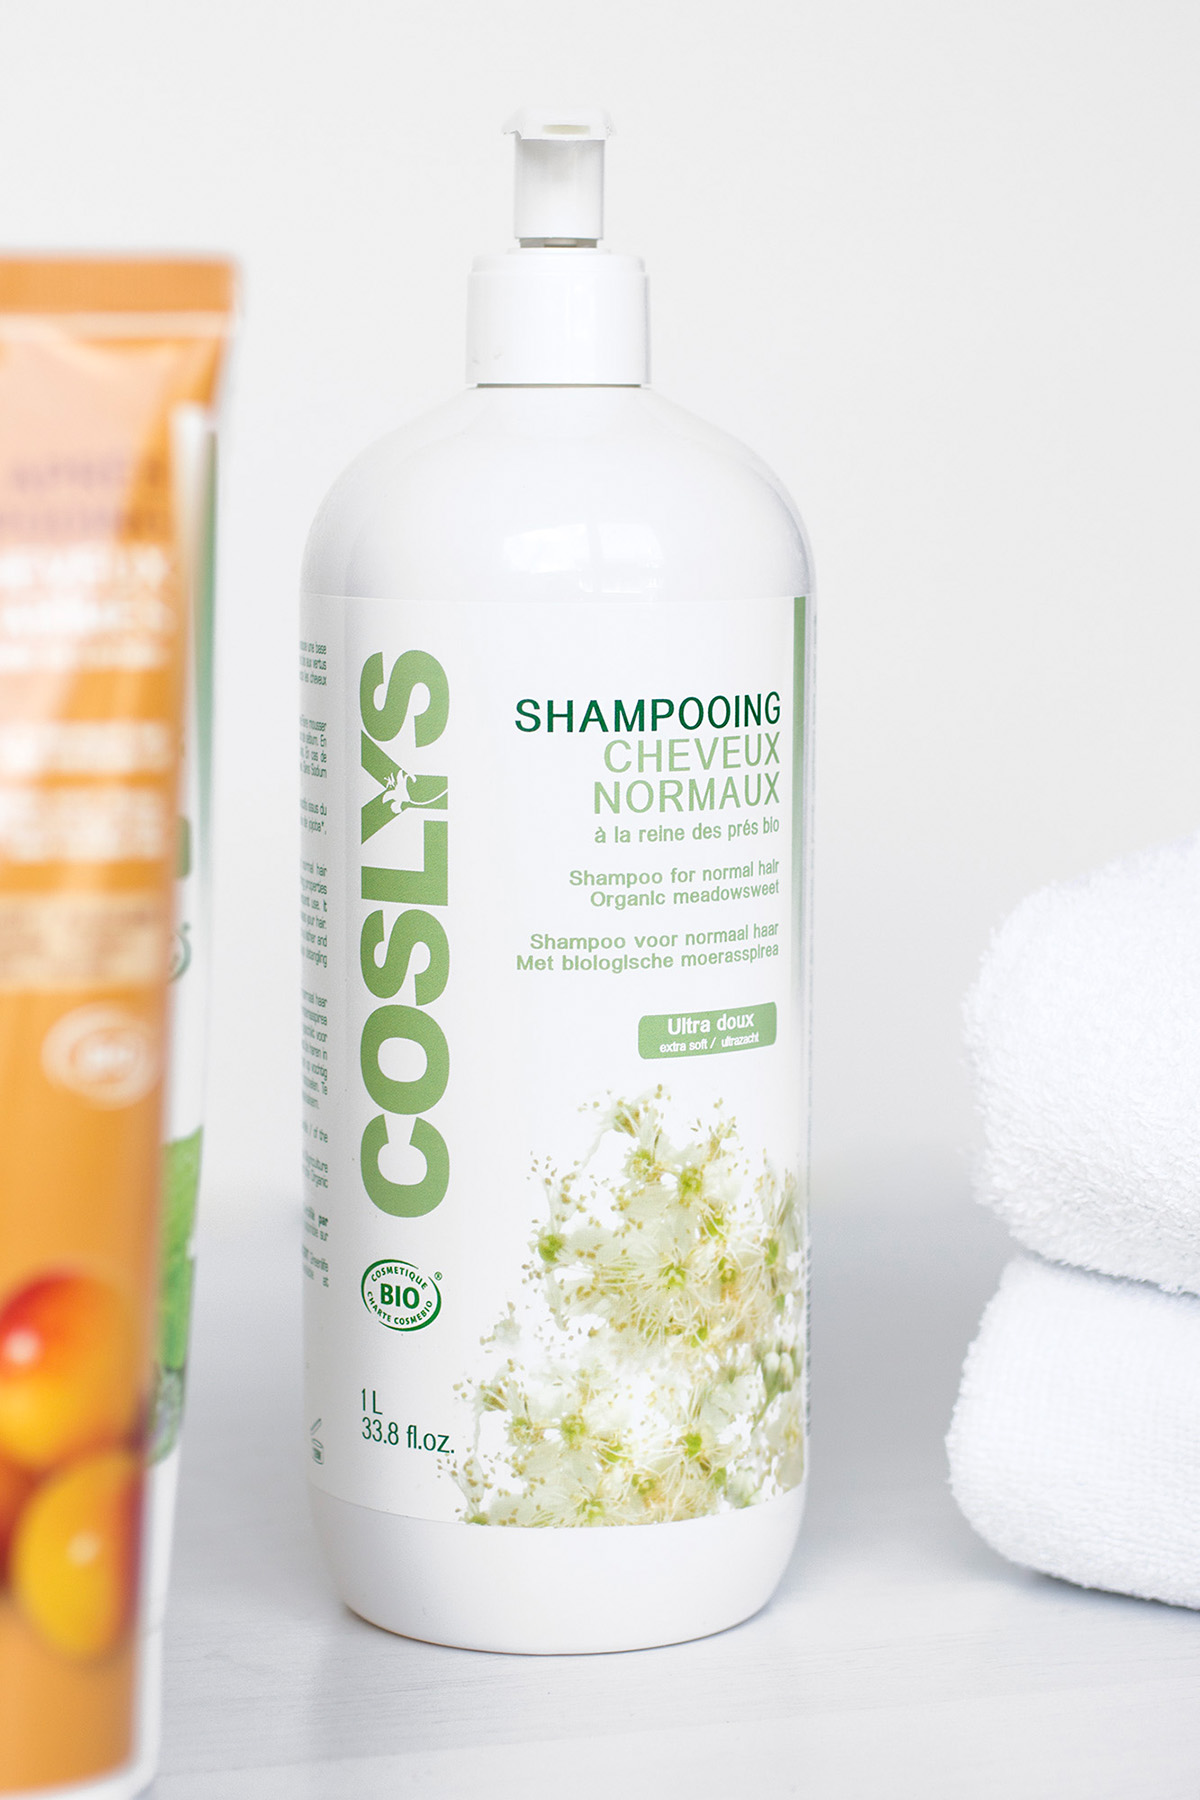 Shampooing cheveux normaux - Coslys